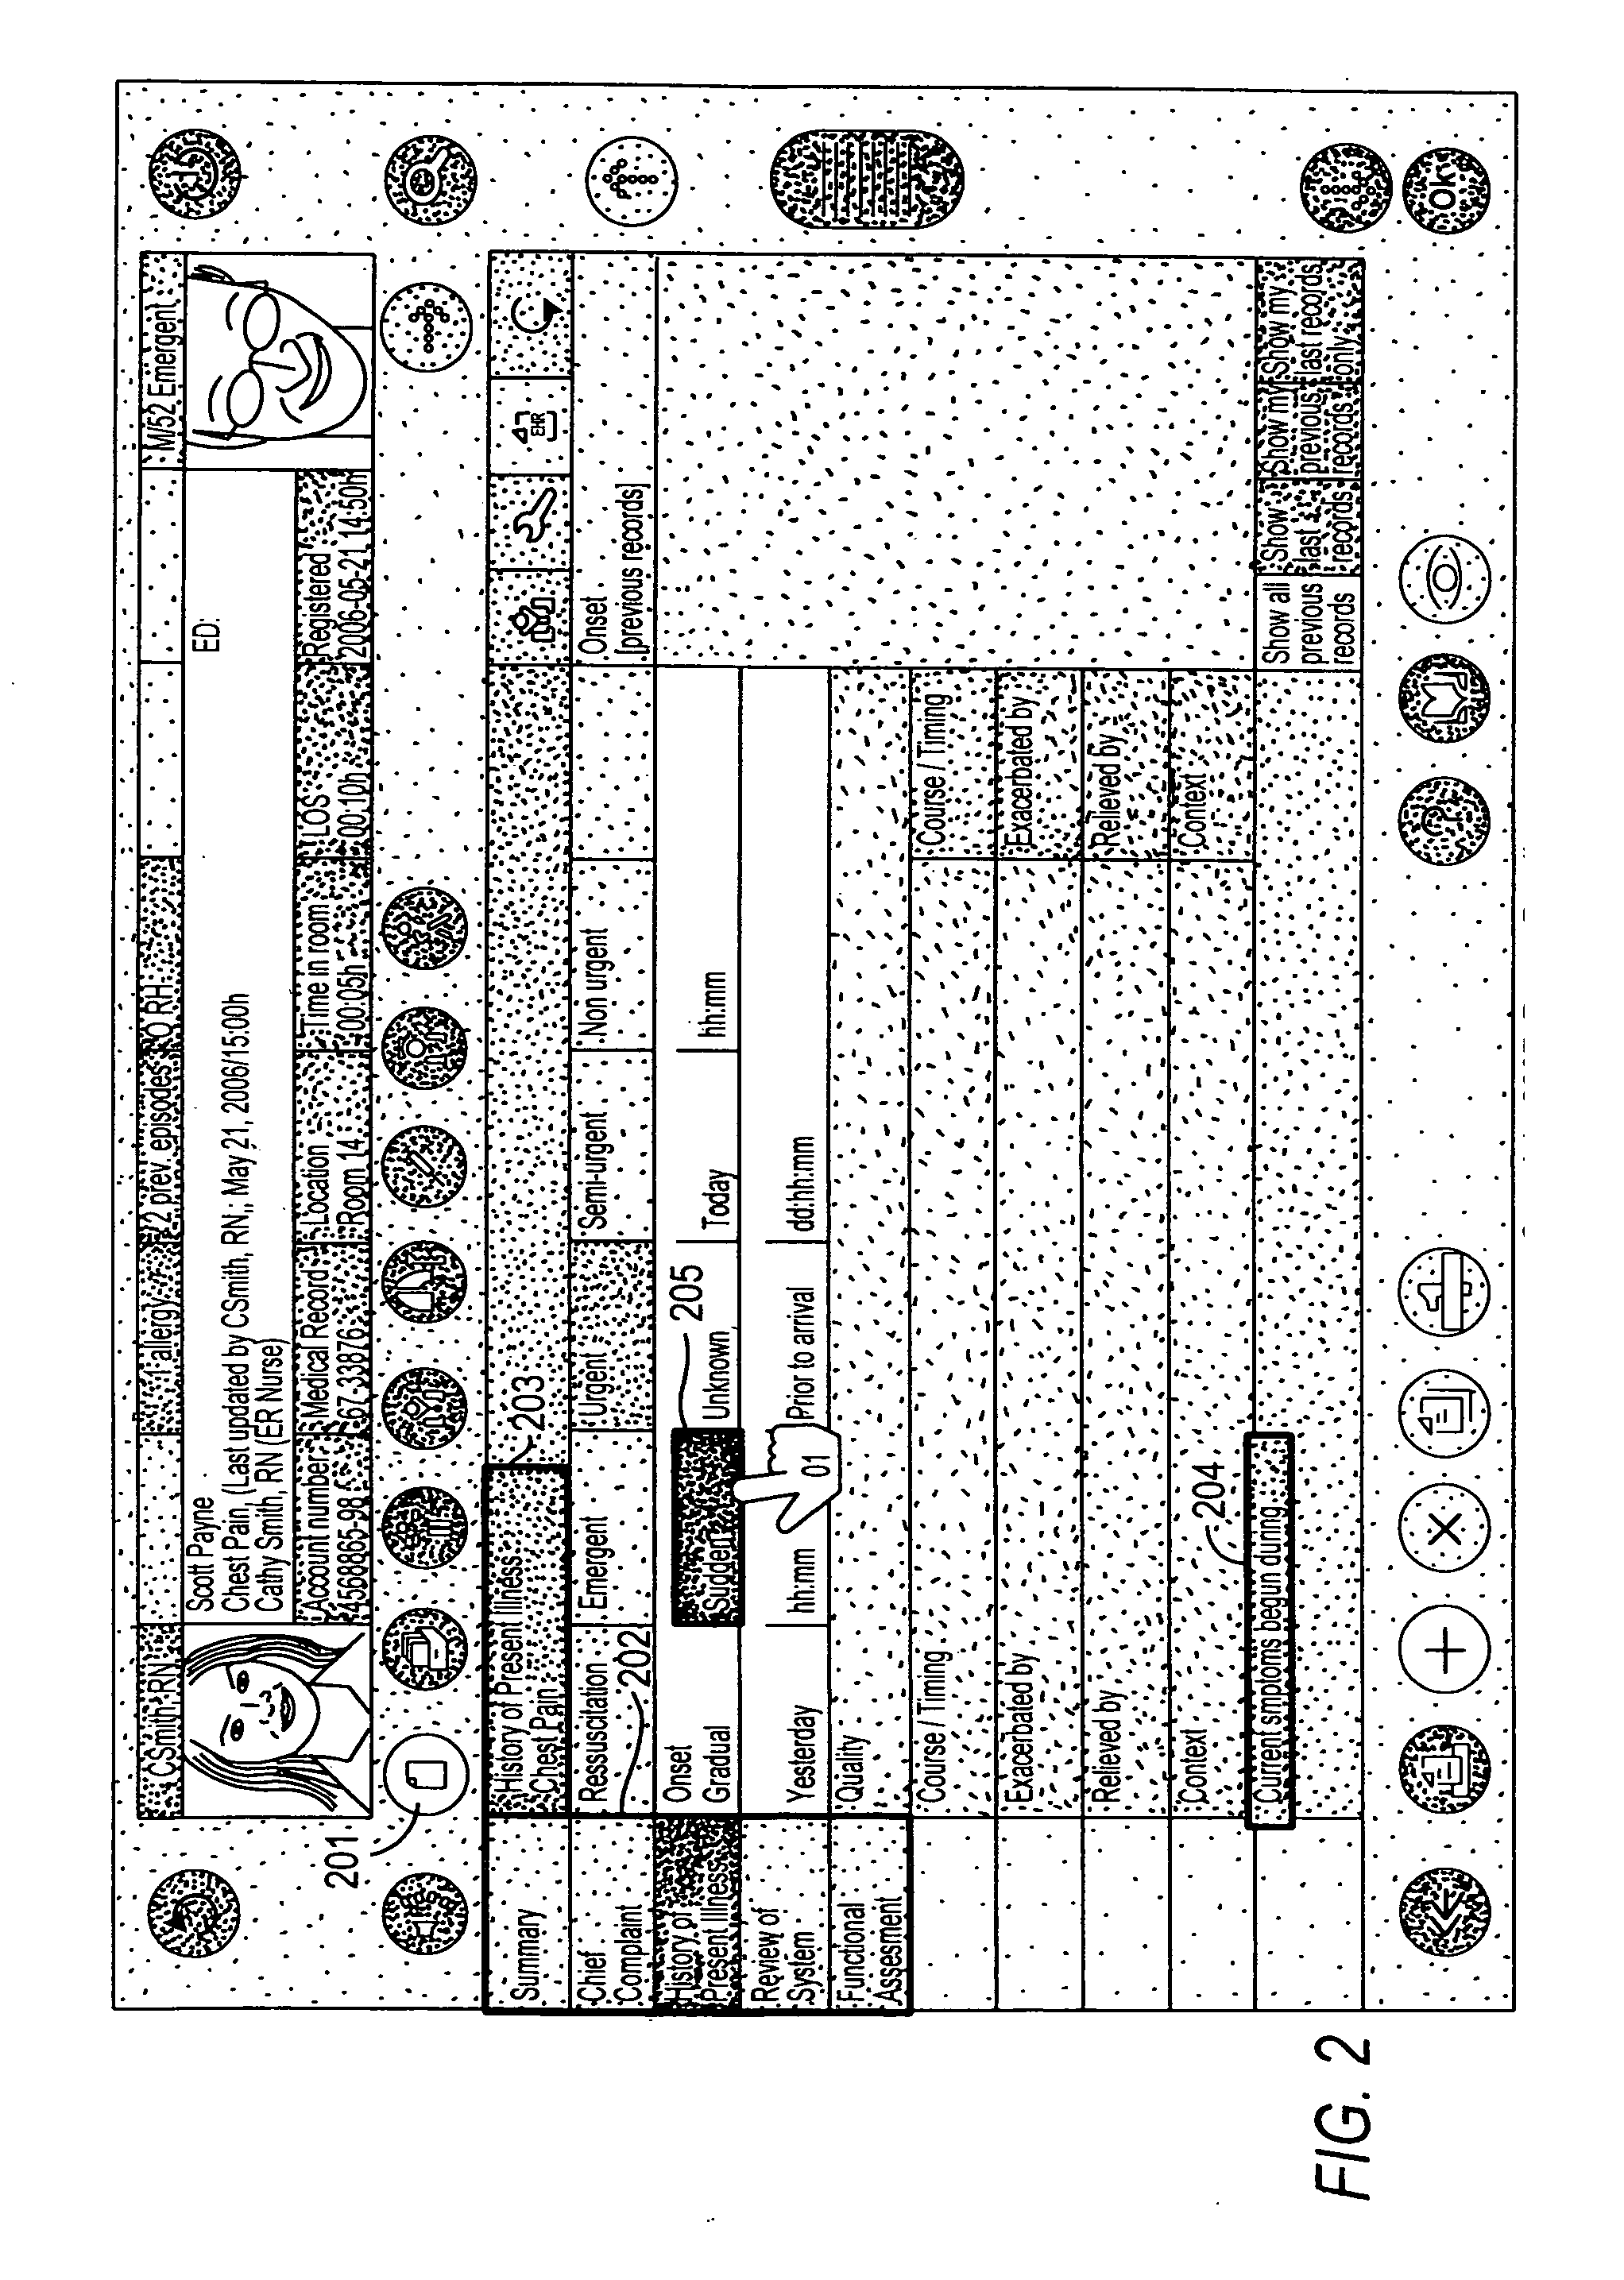 Electronic health record touch screen form entry method